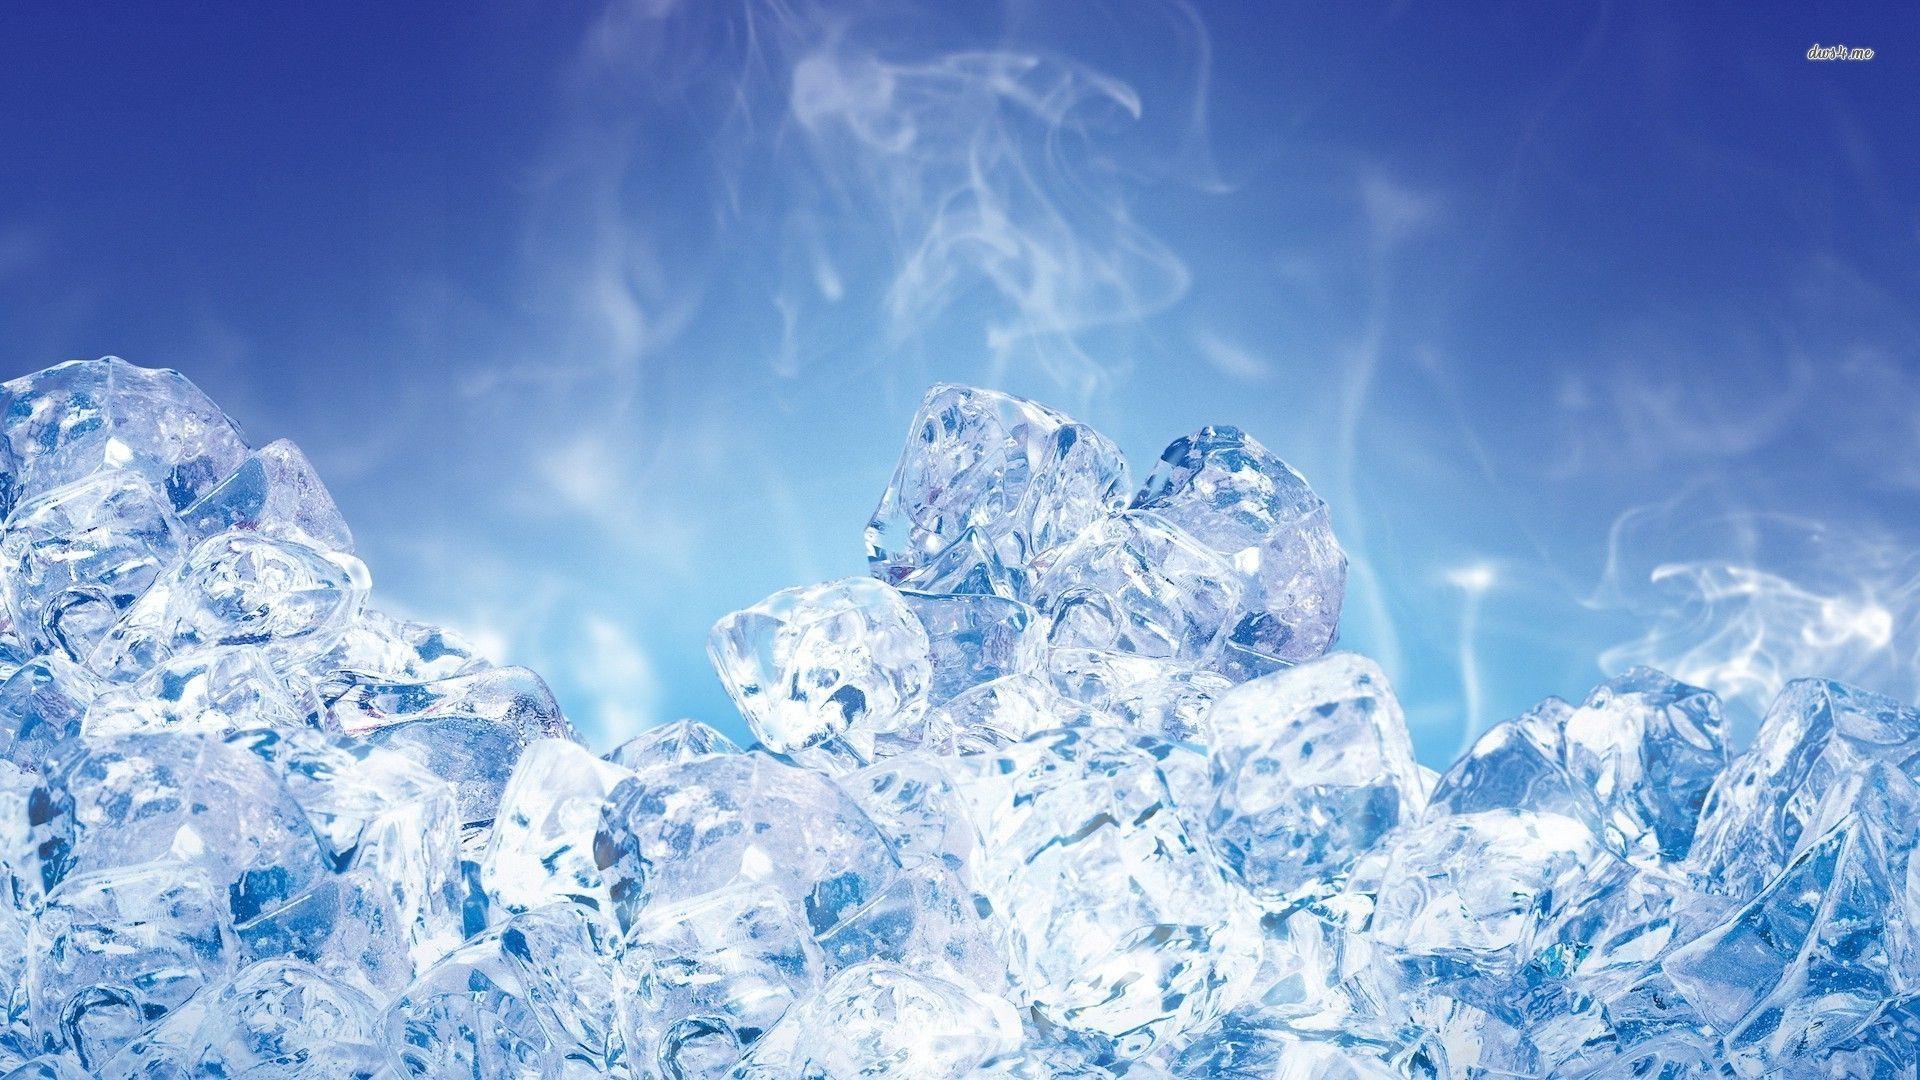 Melting Ice Cubes HD Wallpaper, Background Image